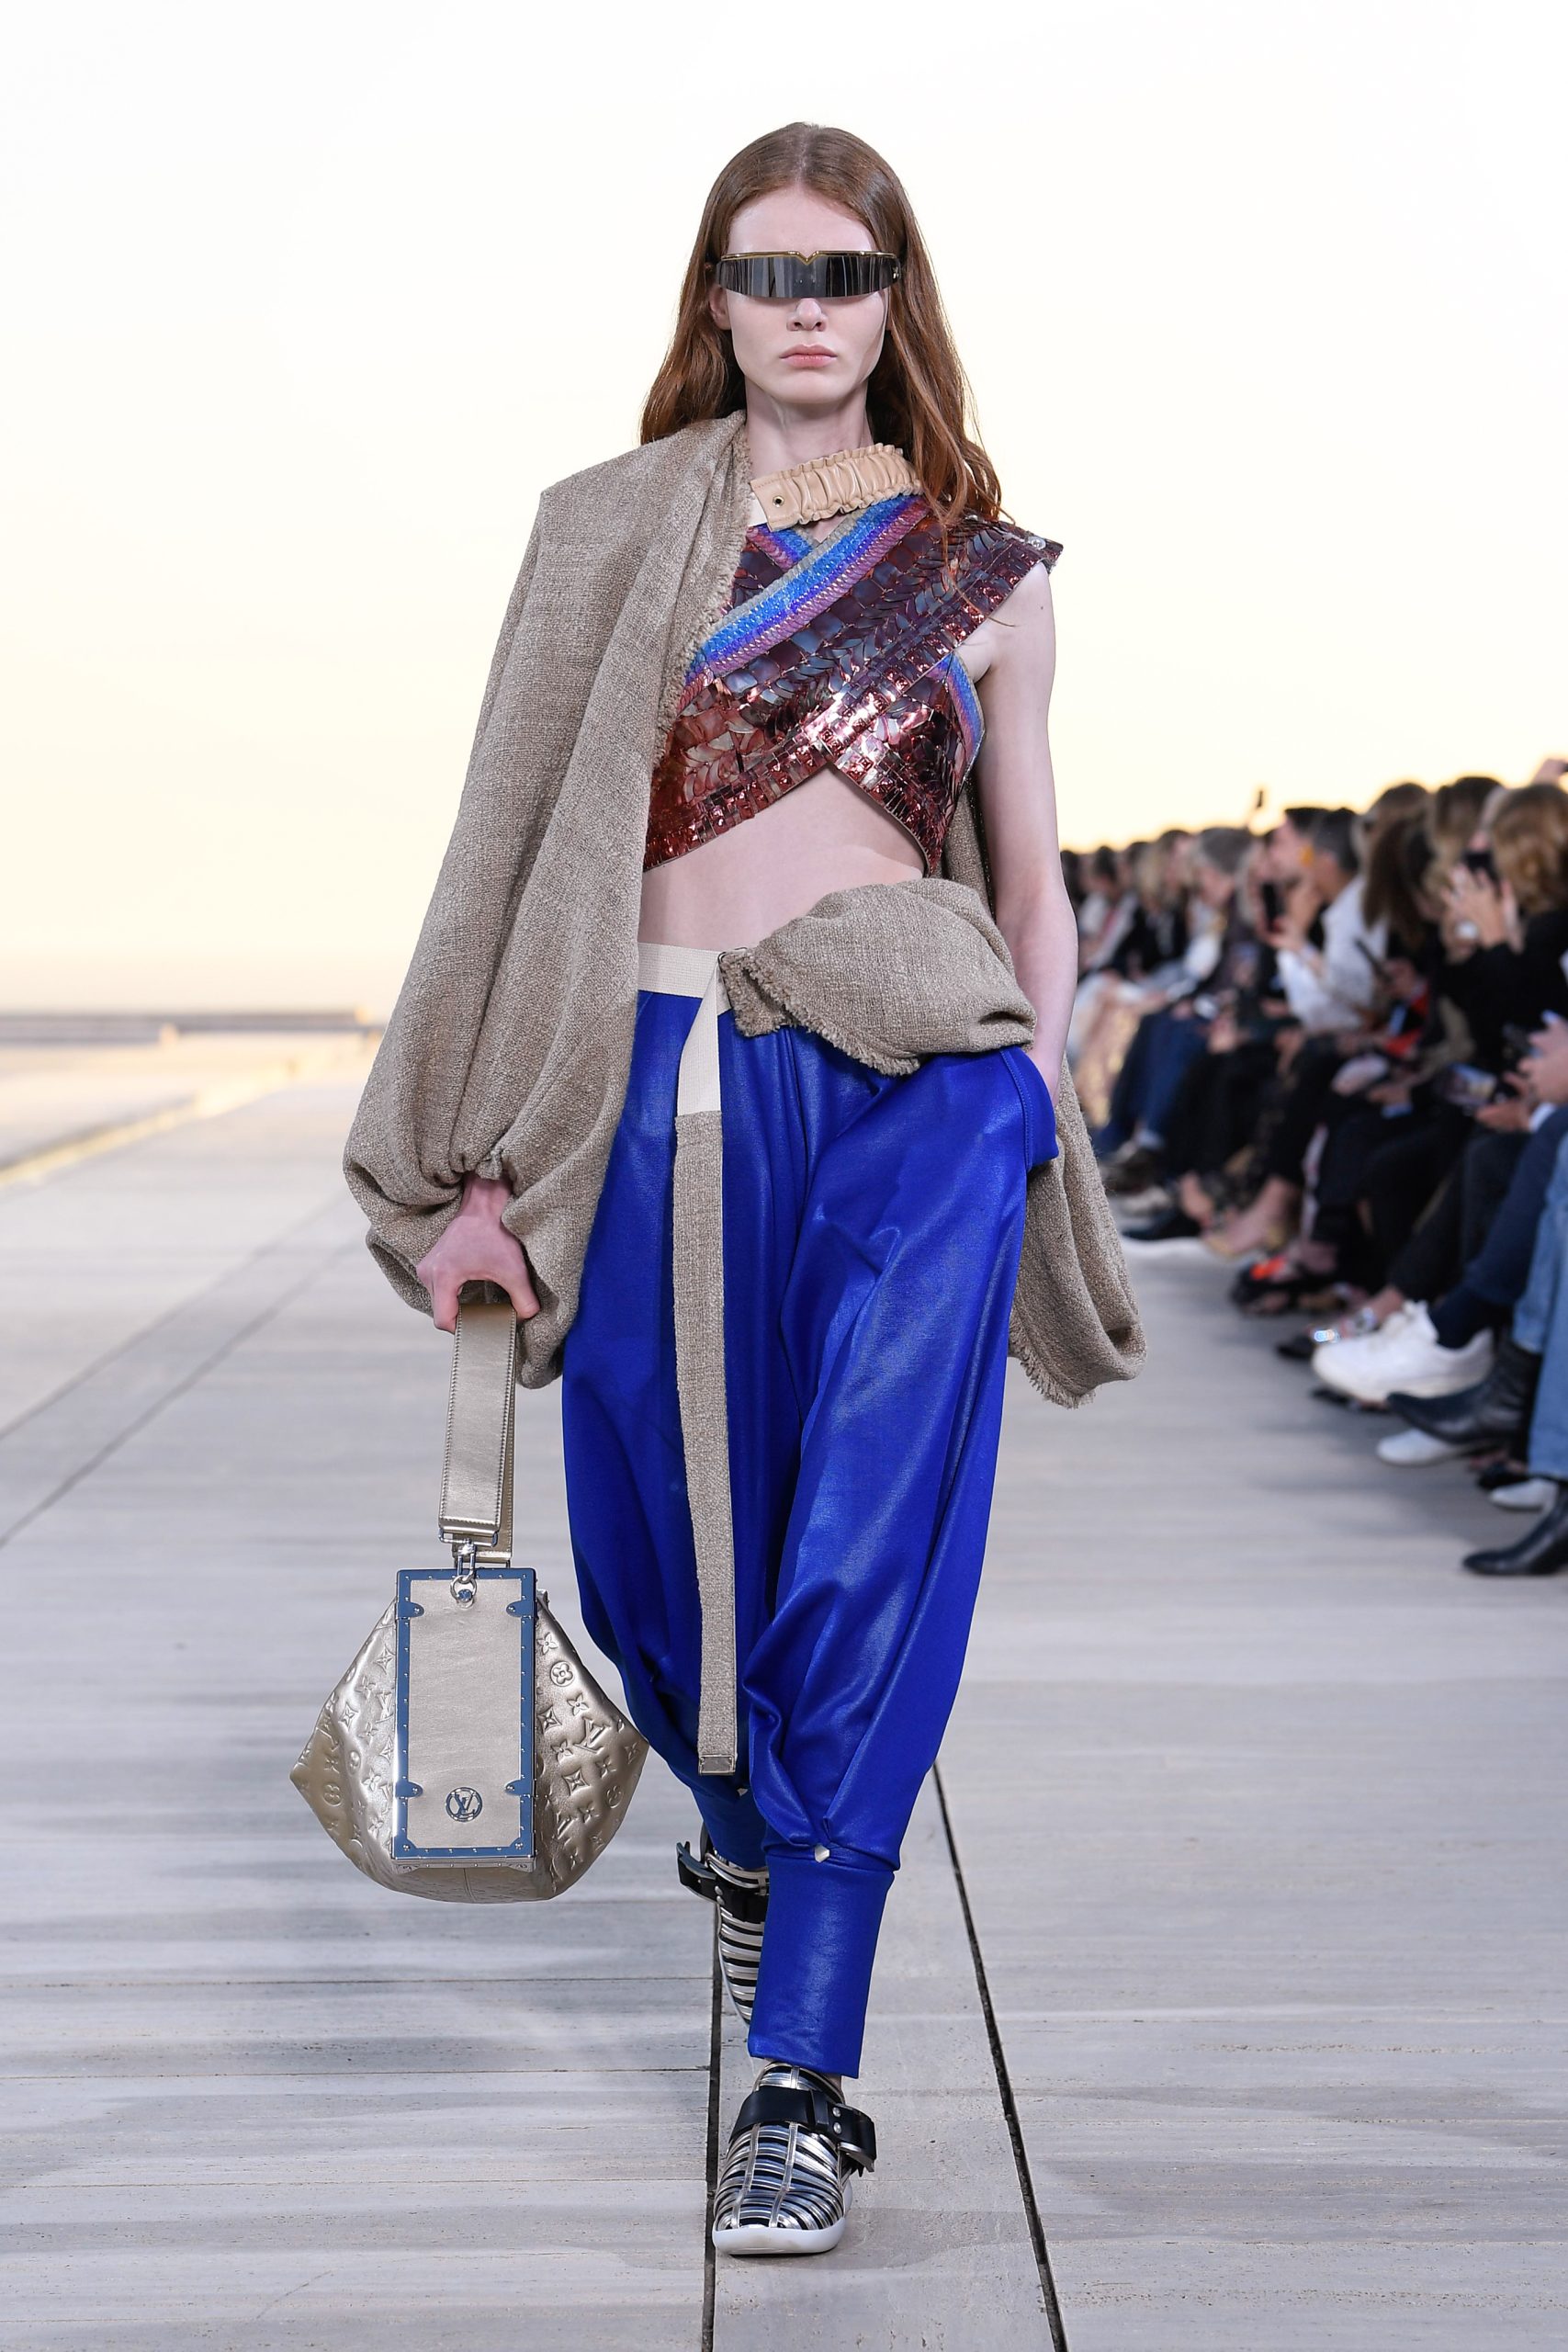 Glass reviews the Louis Vuitton Cruise 2023 collection - The Glass